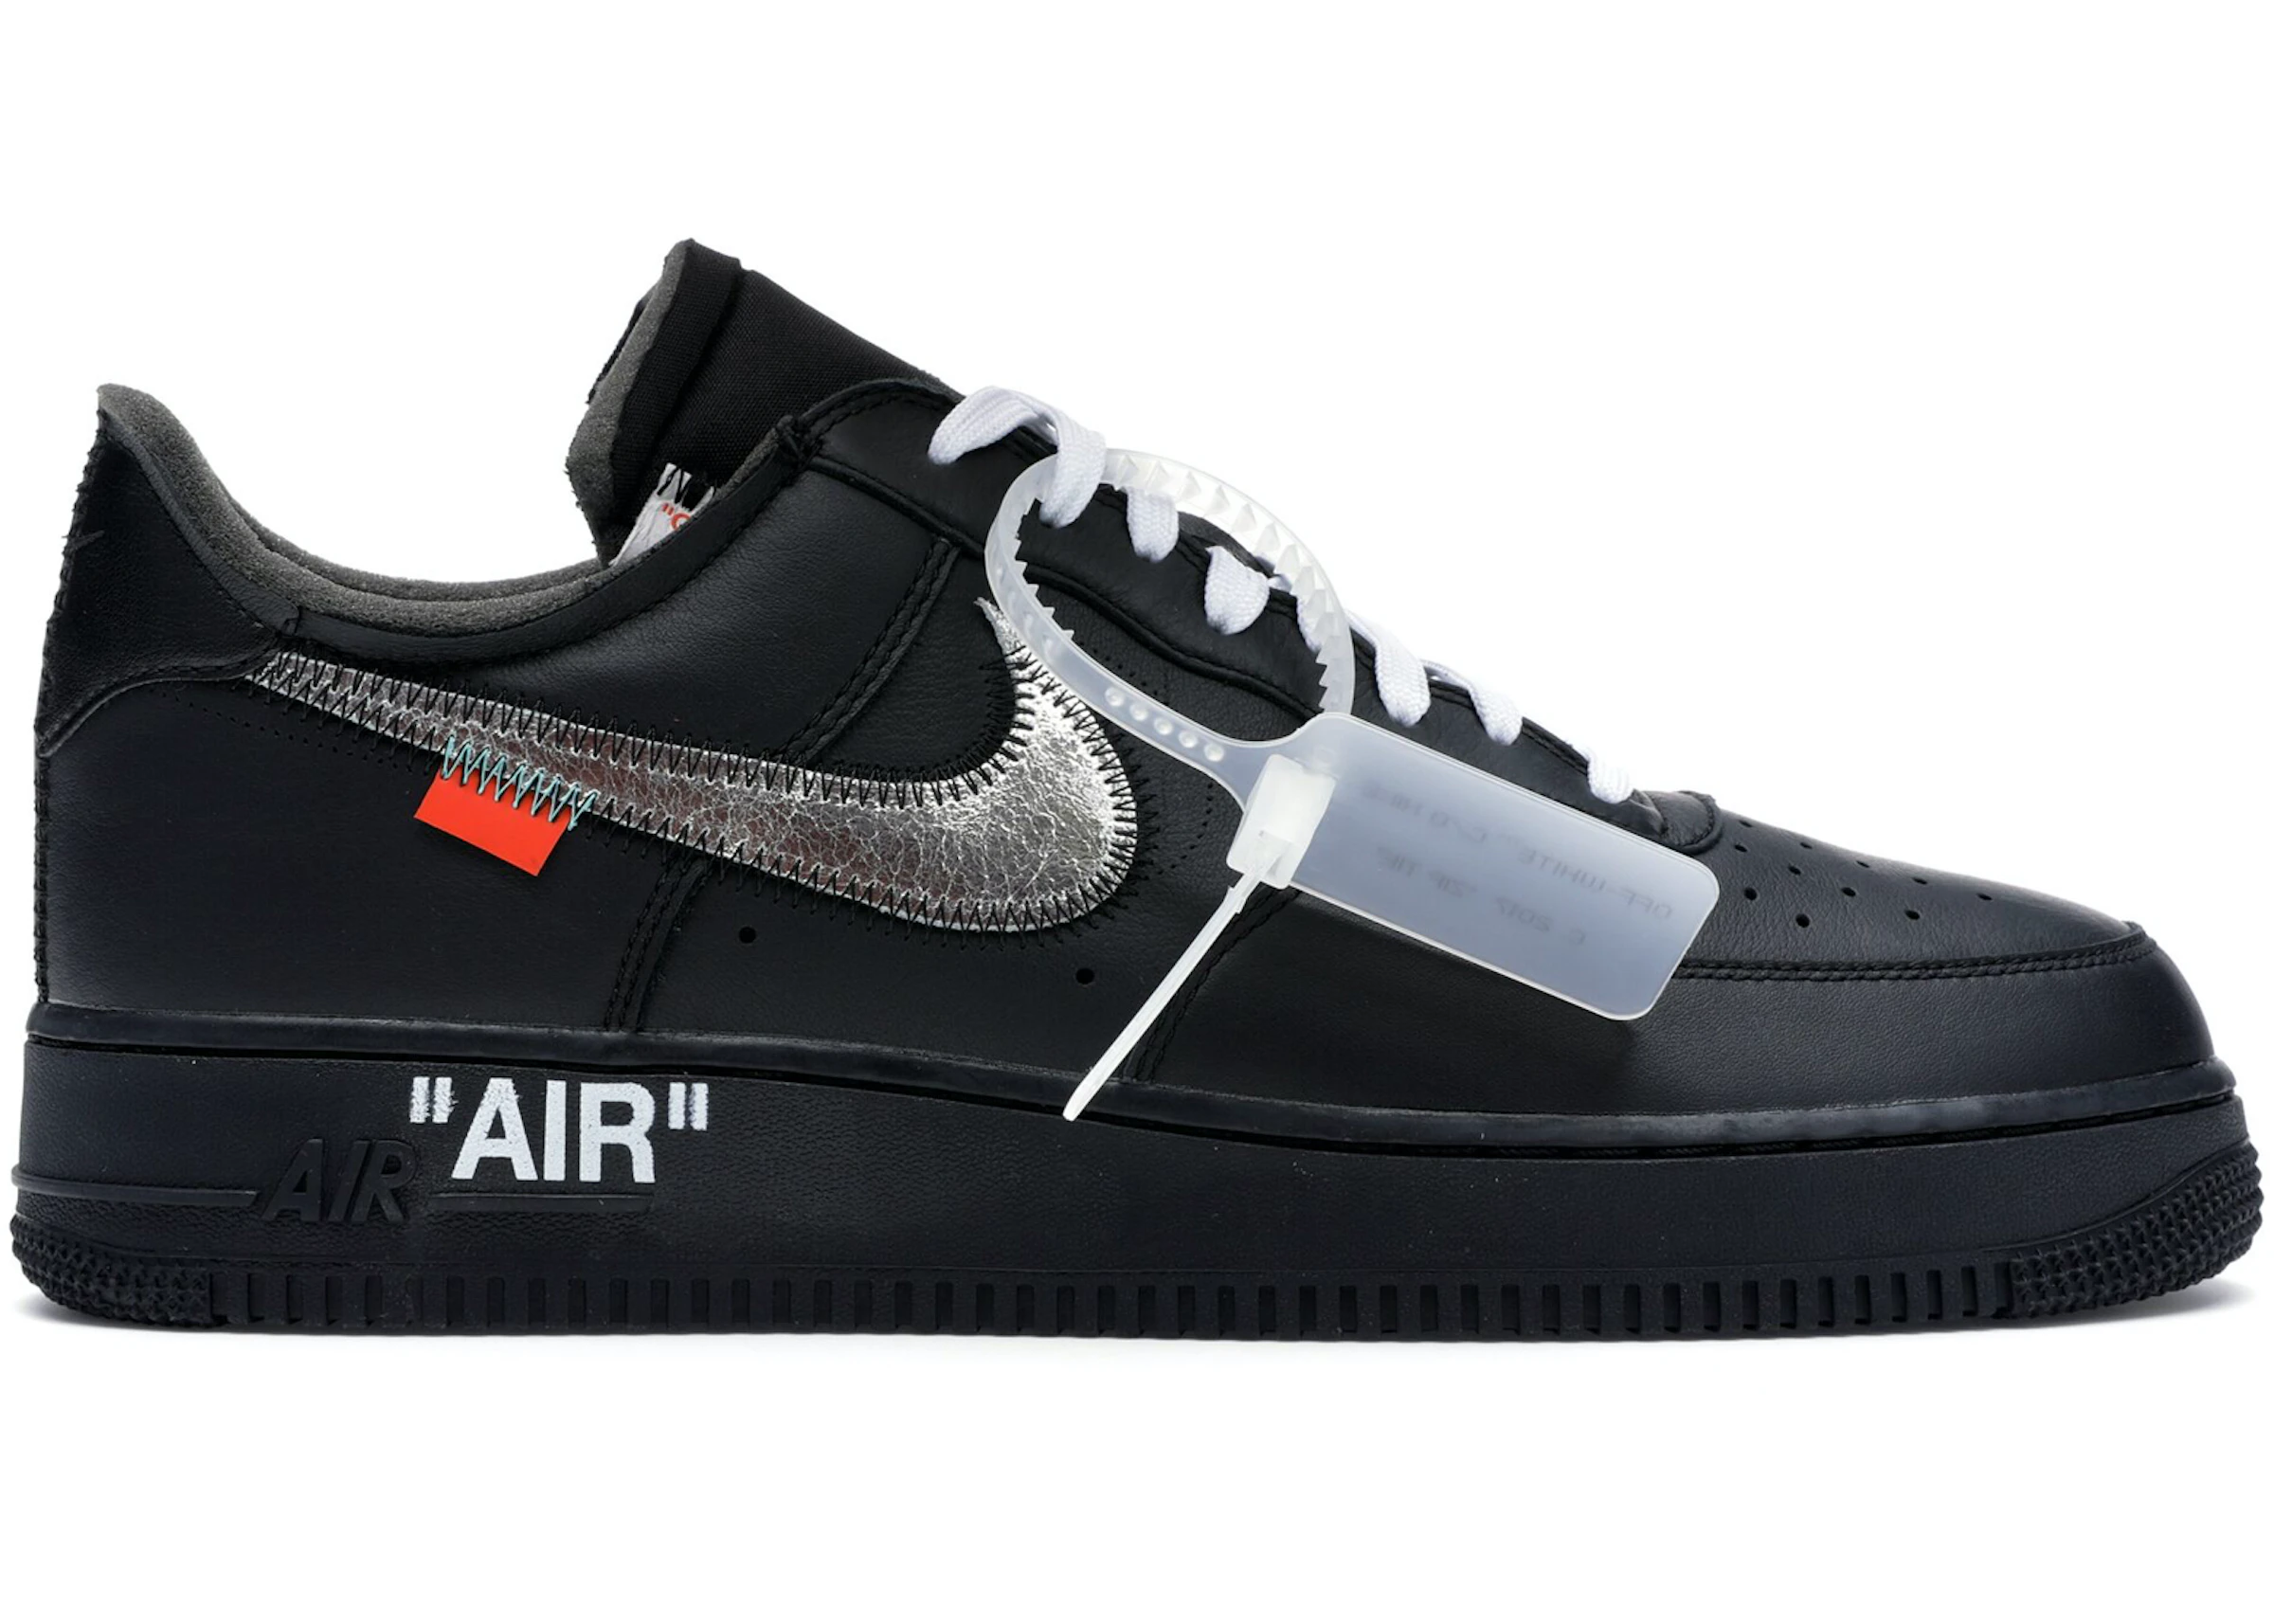 Grab audible Blur Nike Air Force 1 Low '07 Off-White MoMA (without Socks) - AV5210-001 - US